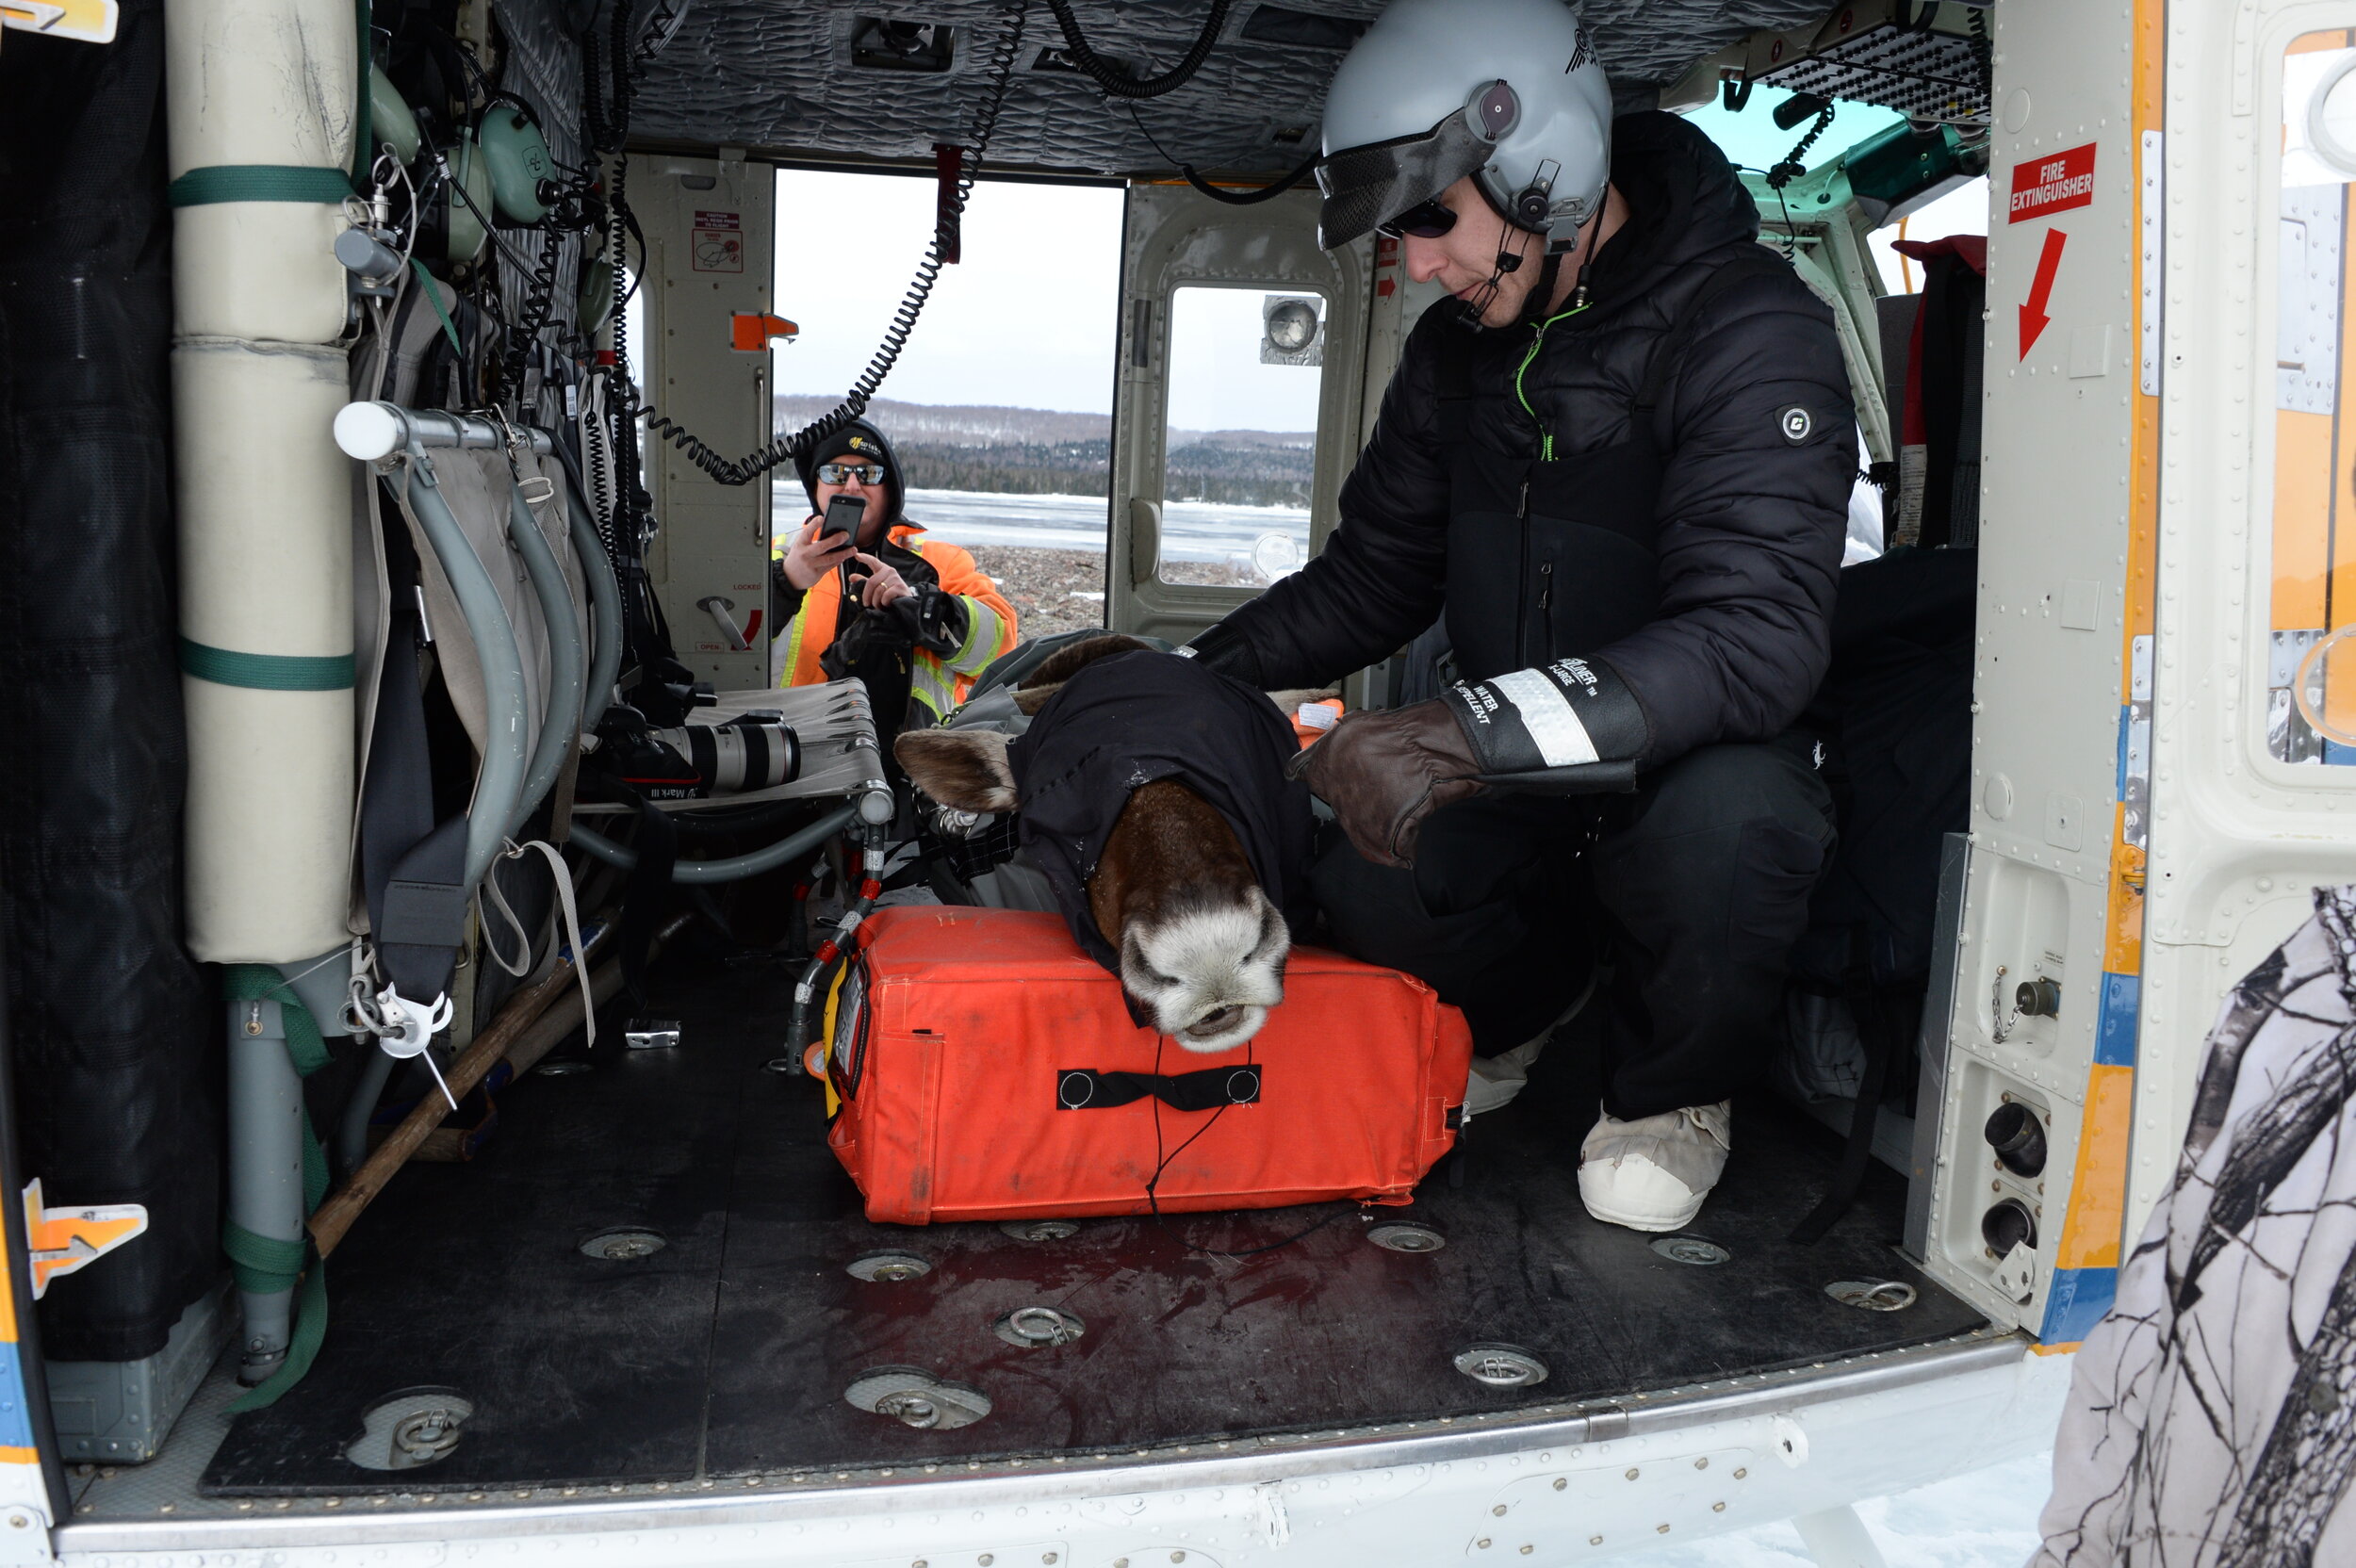 Lake Superior Caribou: A person rubs a blindfolded caribou inside a helicopter